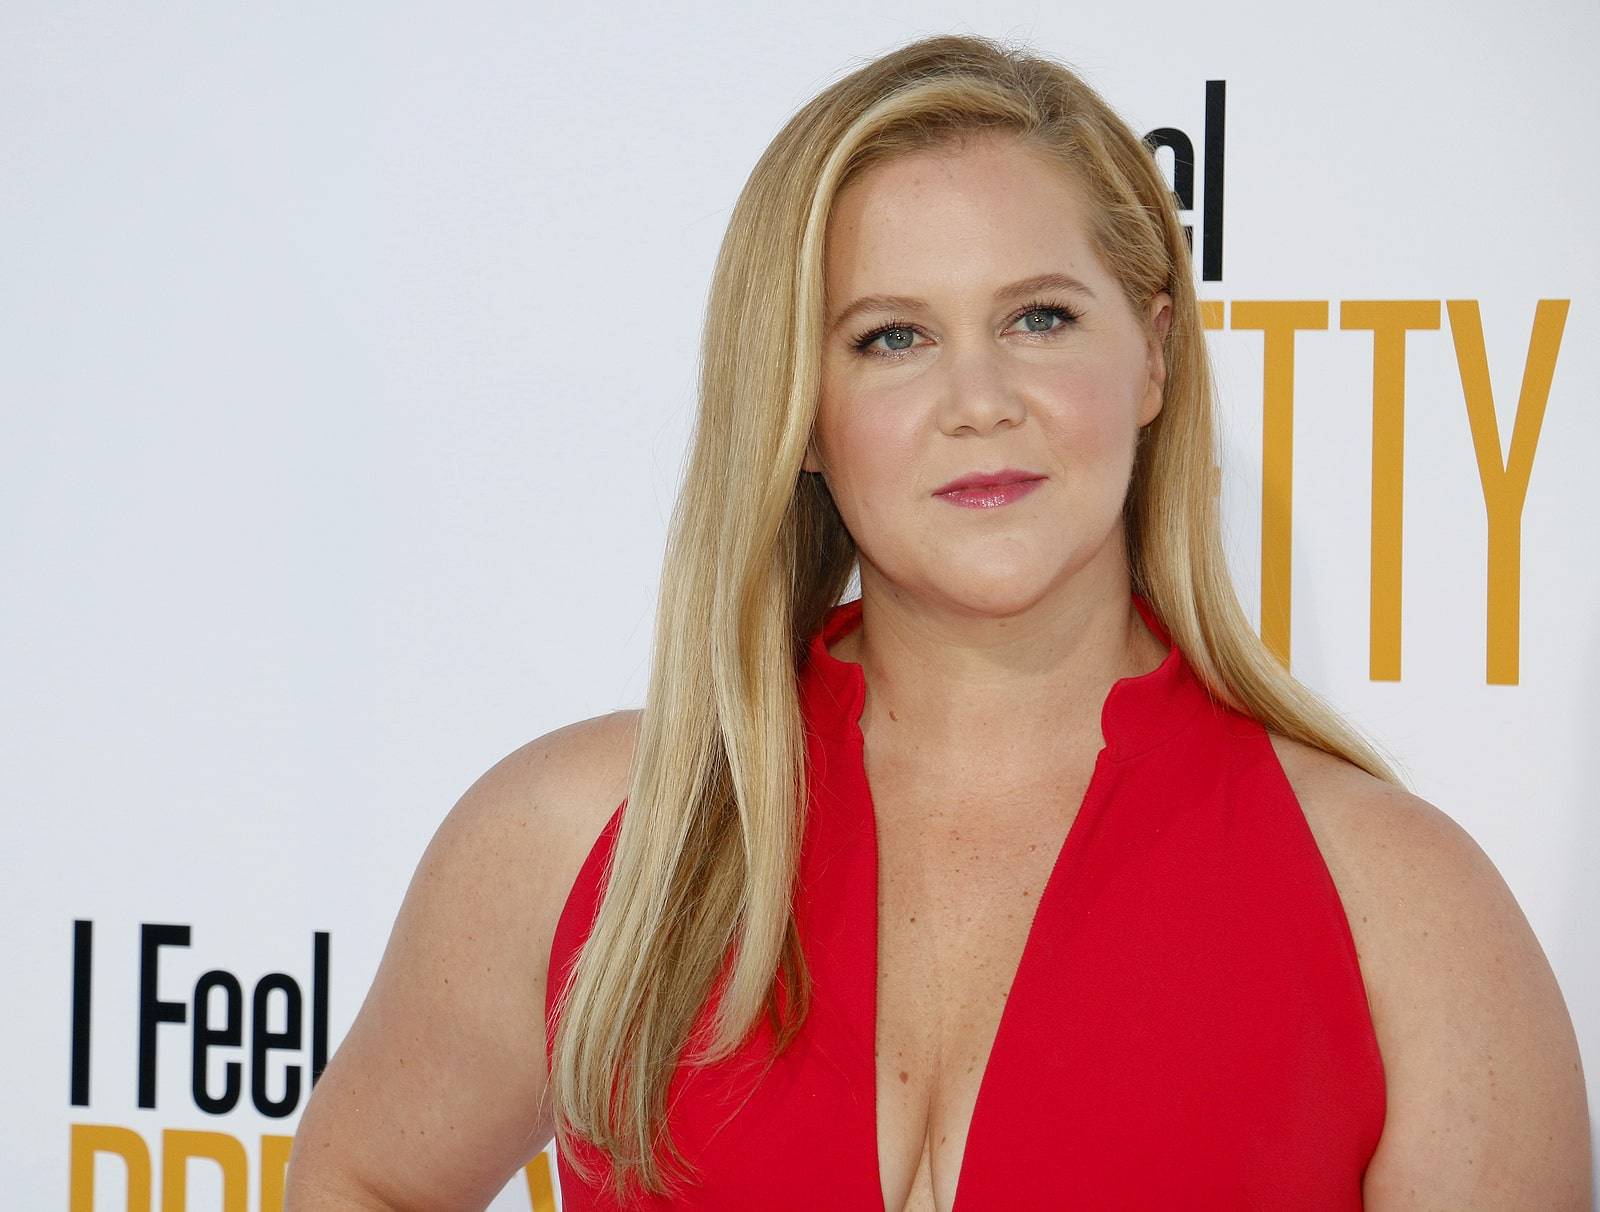 Glamour Called Amy Schumer Plus-Size And She Replied This